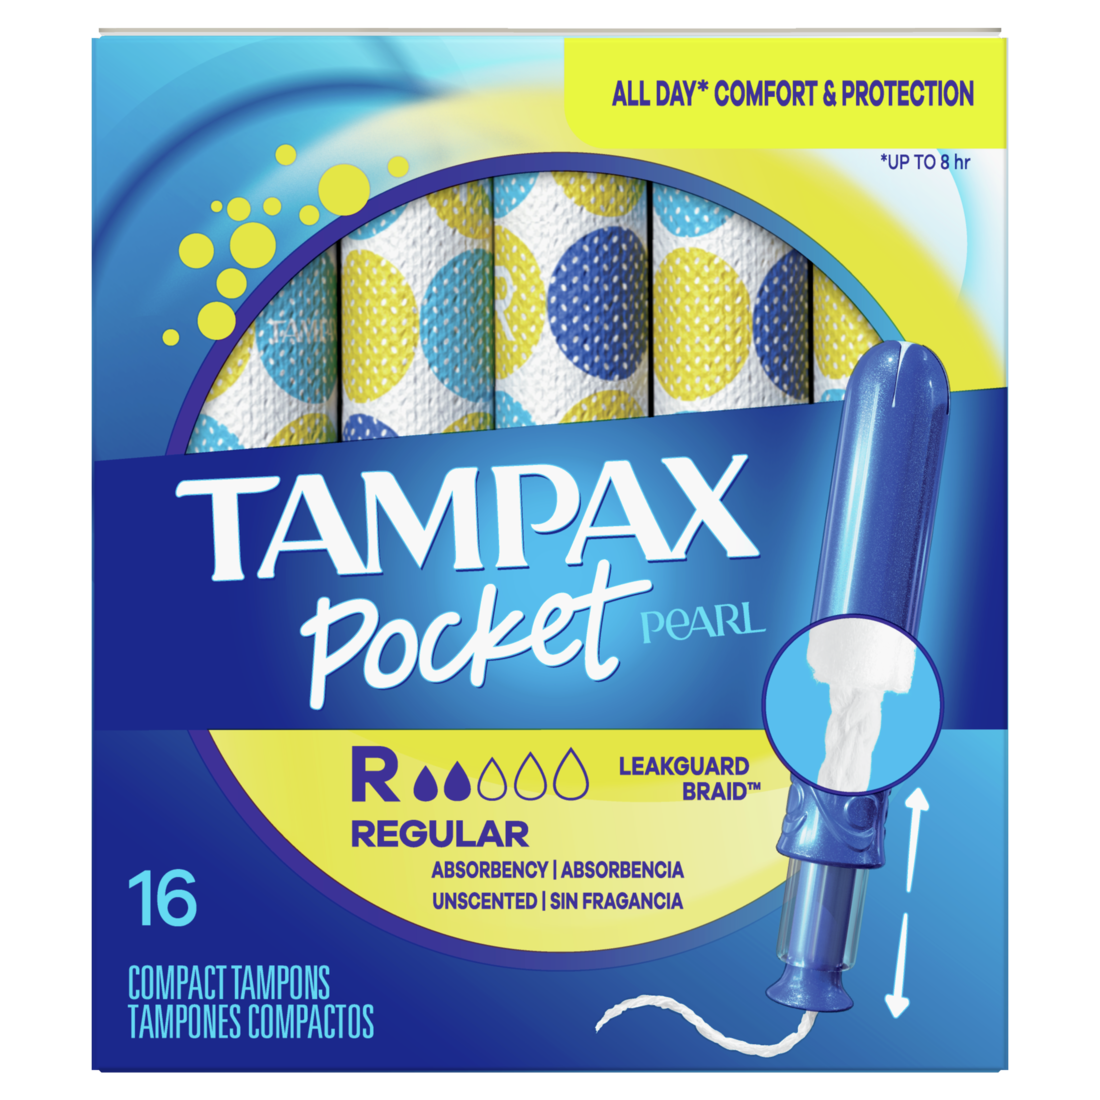 Tampax Pocket Pearl Compact Tampons Regular Absorbency Unscented - 16ct/18pk